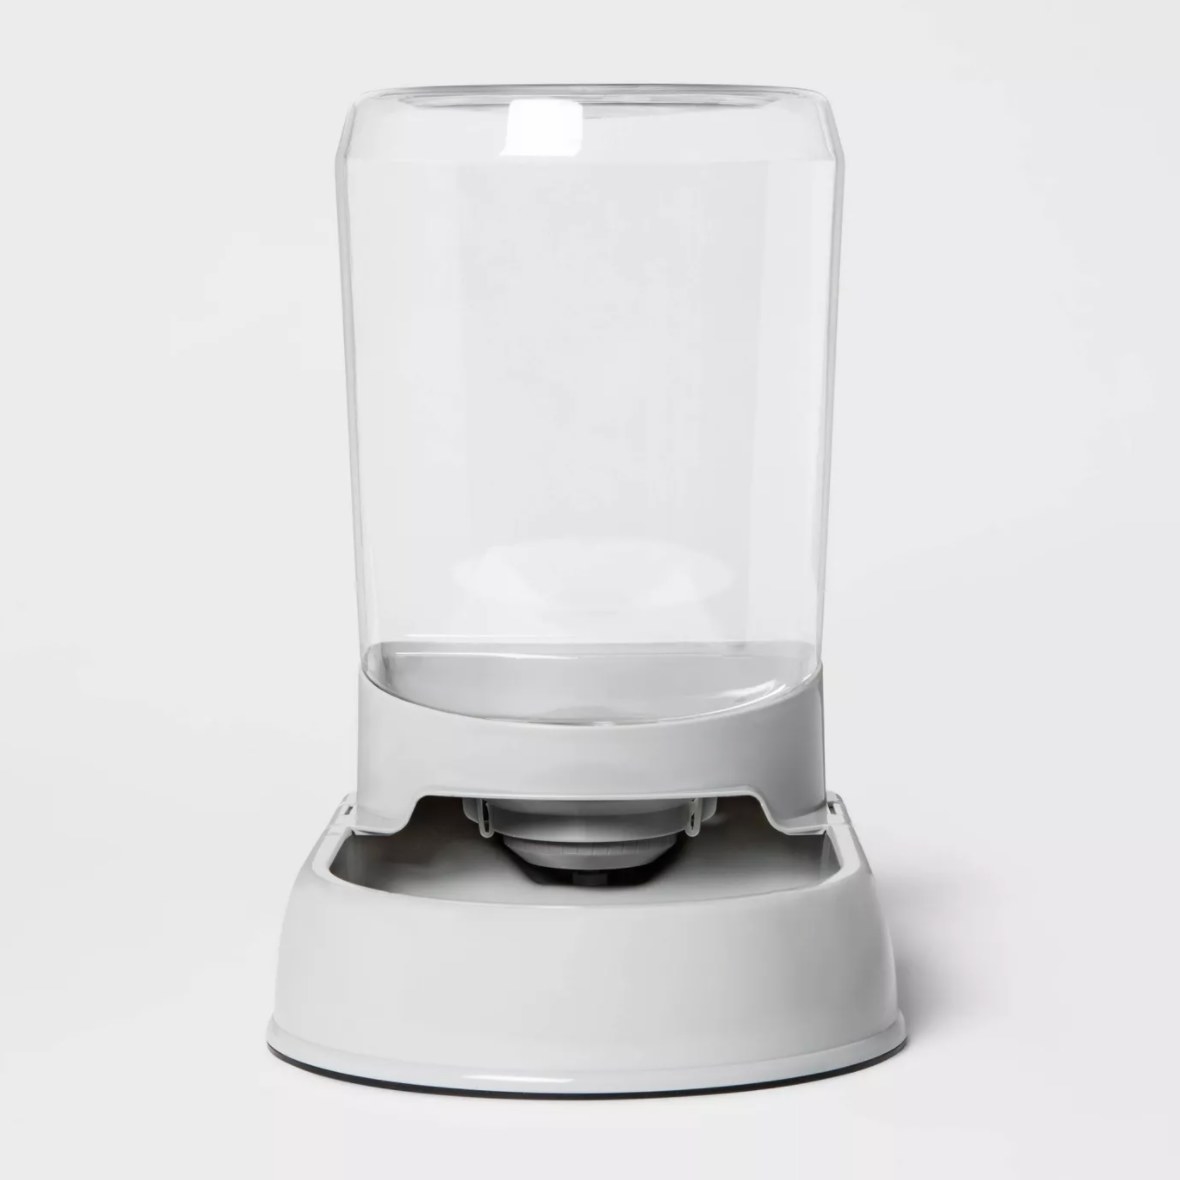 The pet water refiller in clear and gray plastic